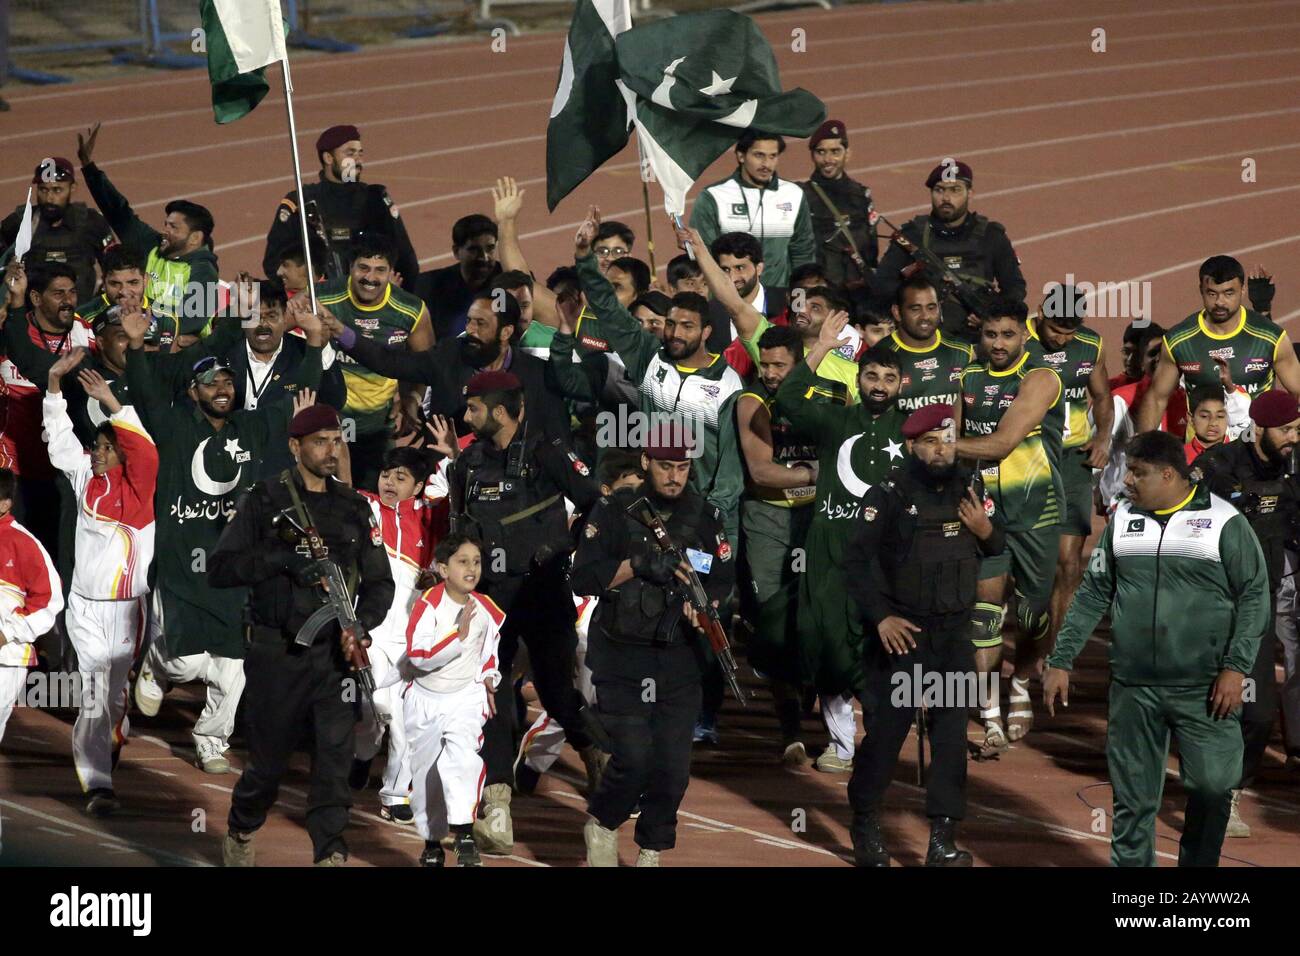 Pakistani Kabaddi team's players wave Pakistan national flags and spectators are celebrating its victory after winning final match of Kabaddi World Cup 2020, as Pakistan won the kabaddi world-cup 2020 by 2 points scoring 43-41 for the first time at Punjab Stadium in Lahore. (Photo by Rana Sajid Hussain/Pacific Press) Stock Photo